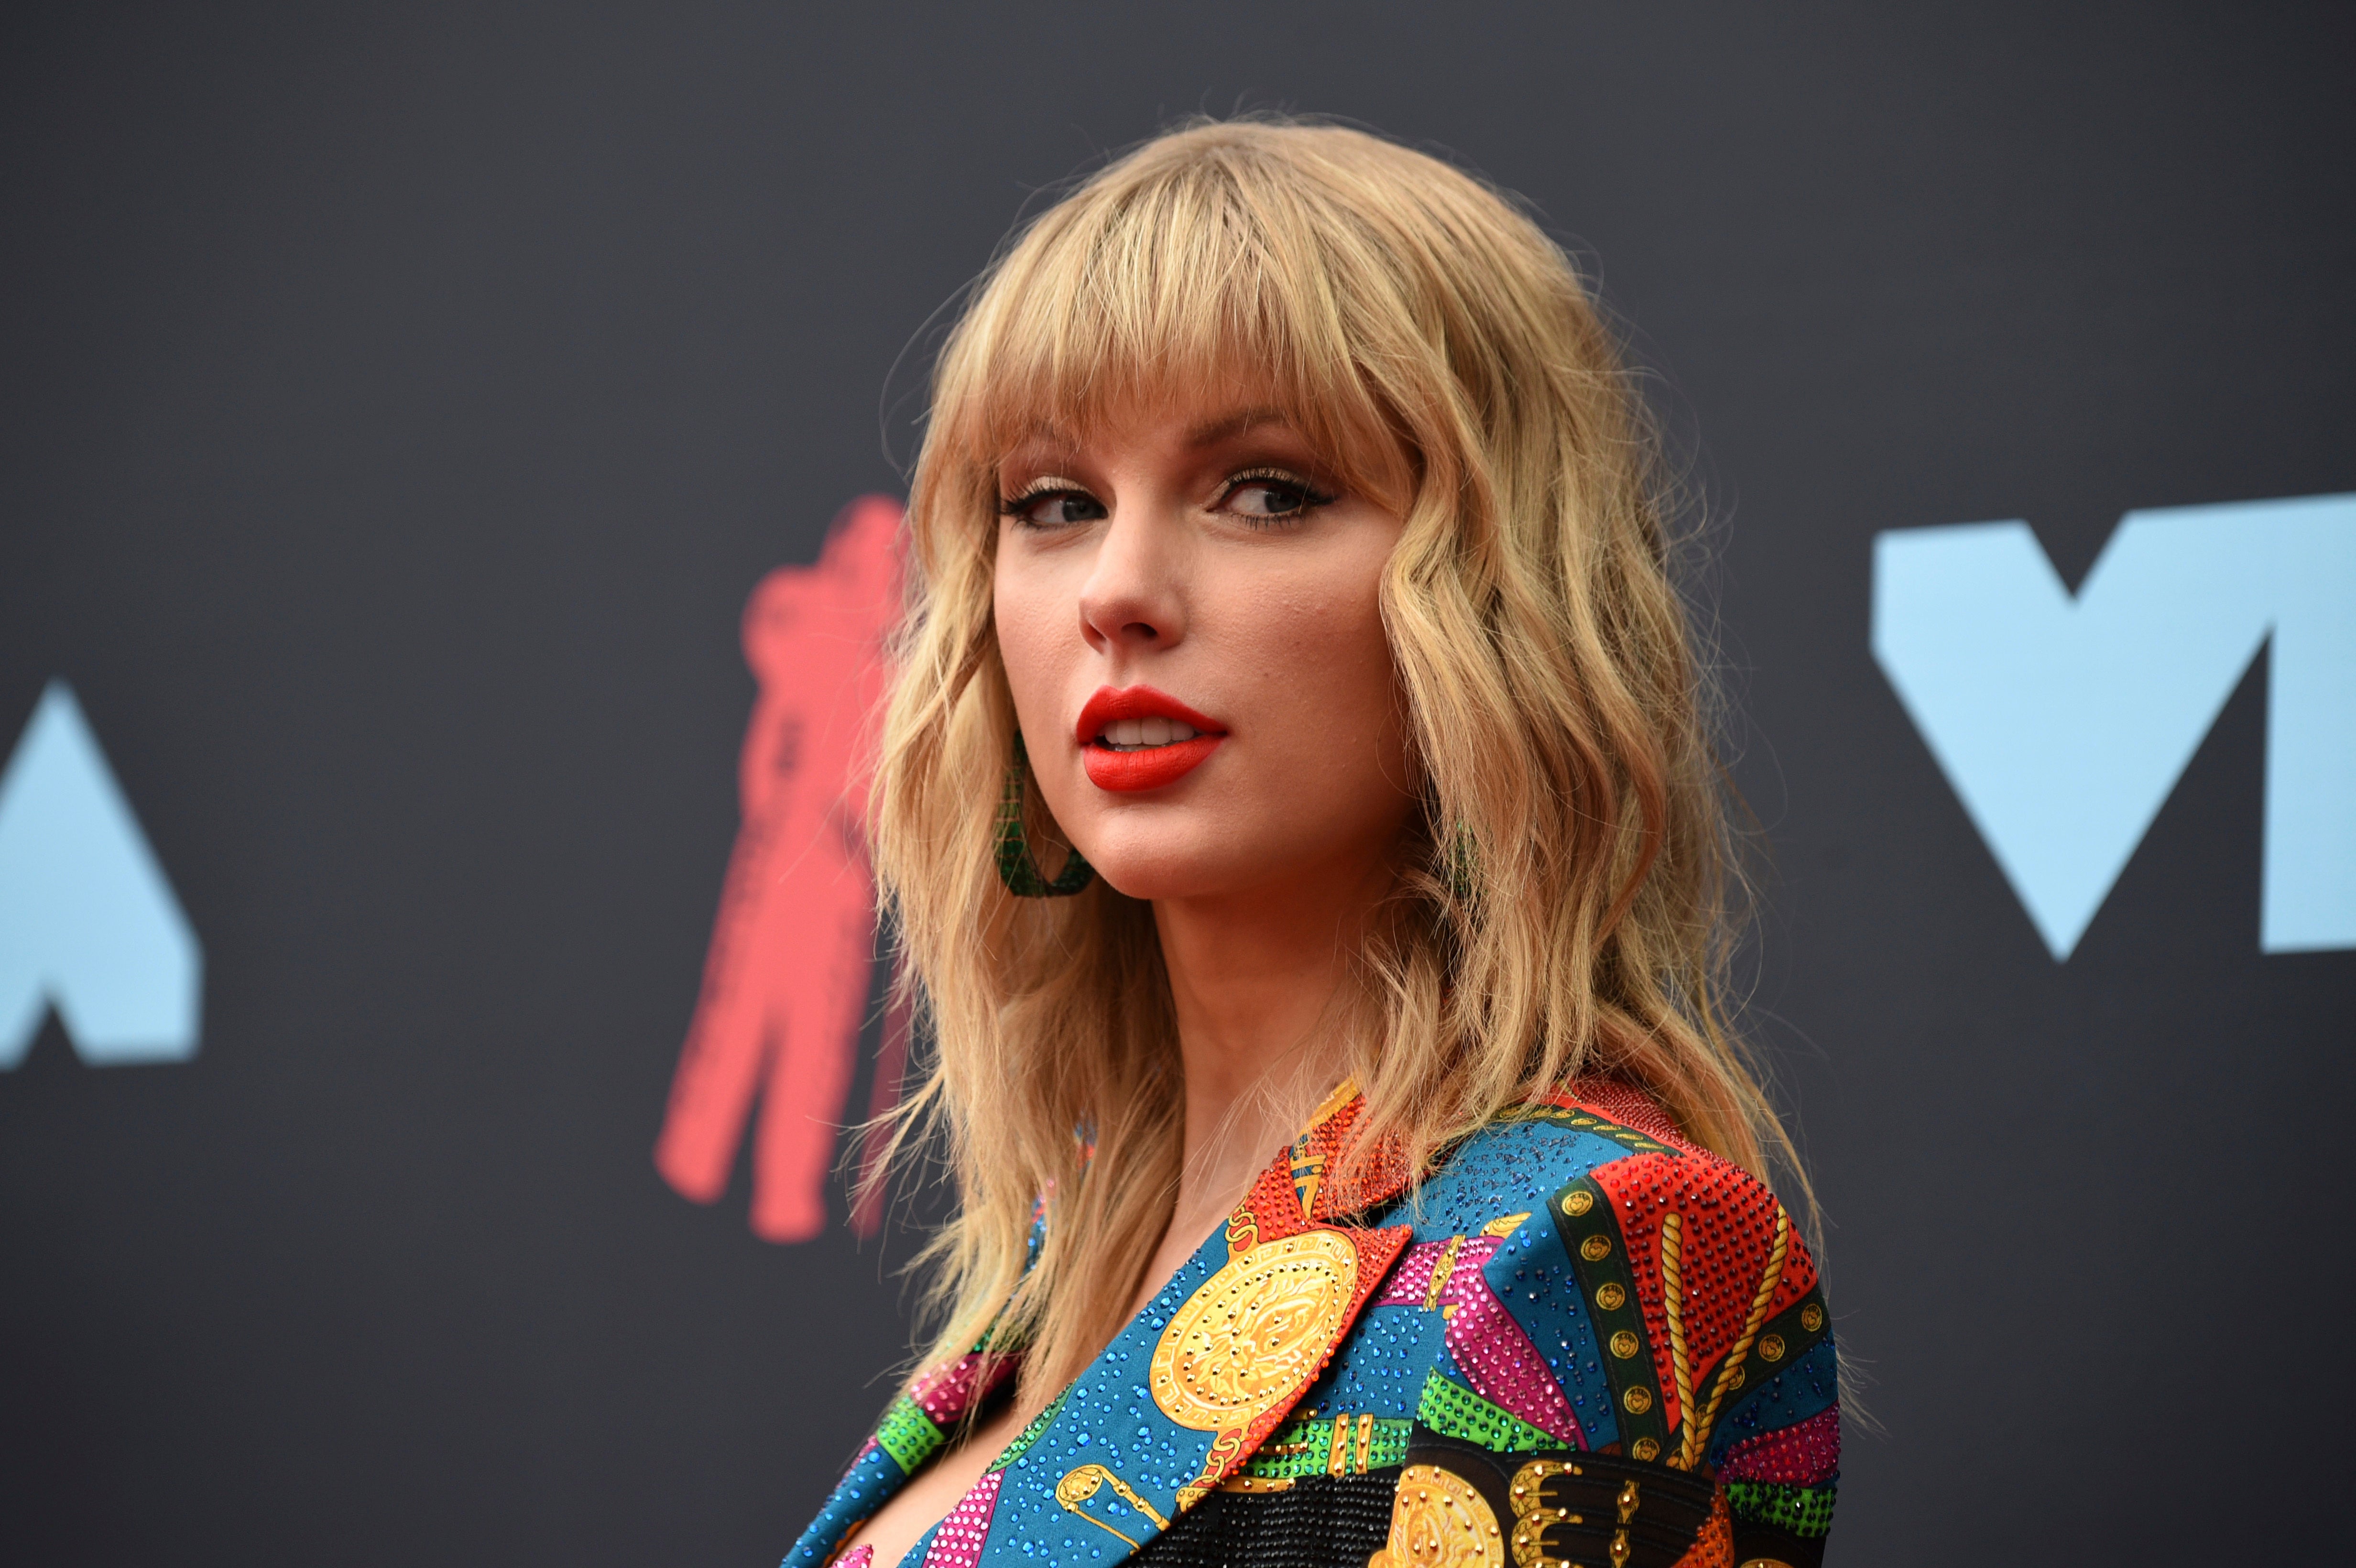 Taylor Swift Strikes Back in Copyright Lawsuit, Claims She Wrote Hit ‘Shake It Off’